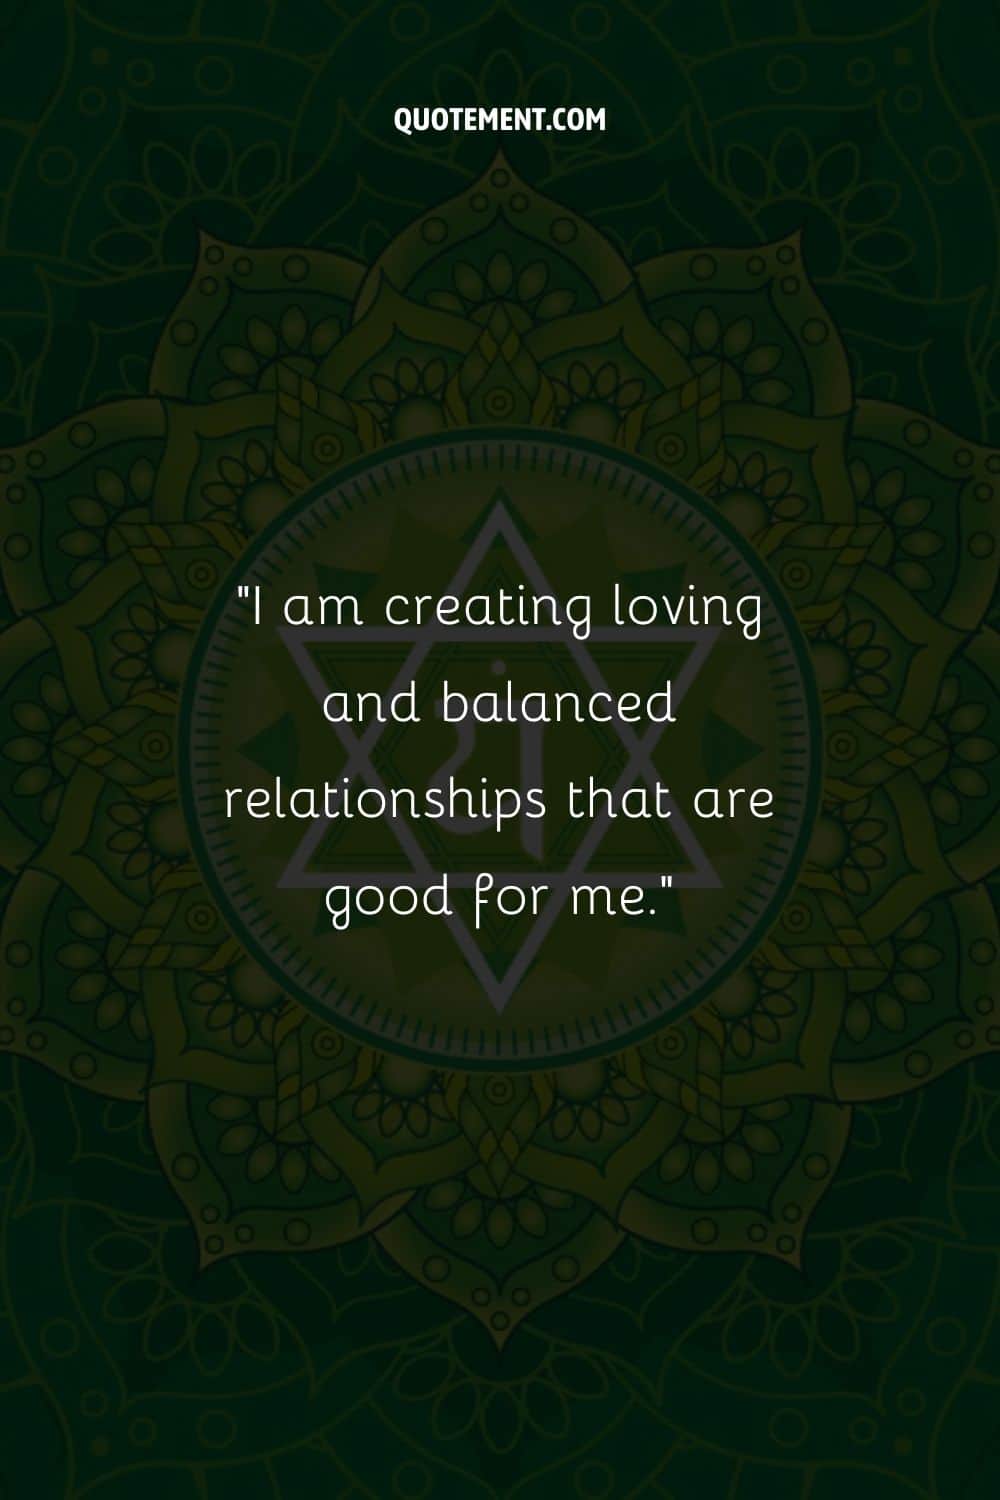 I am creating loving and balanced relationships that are good for me